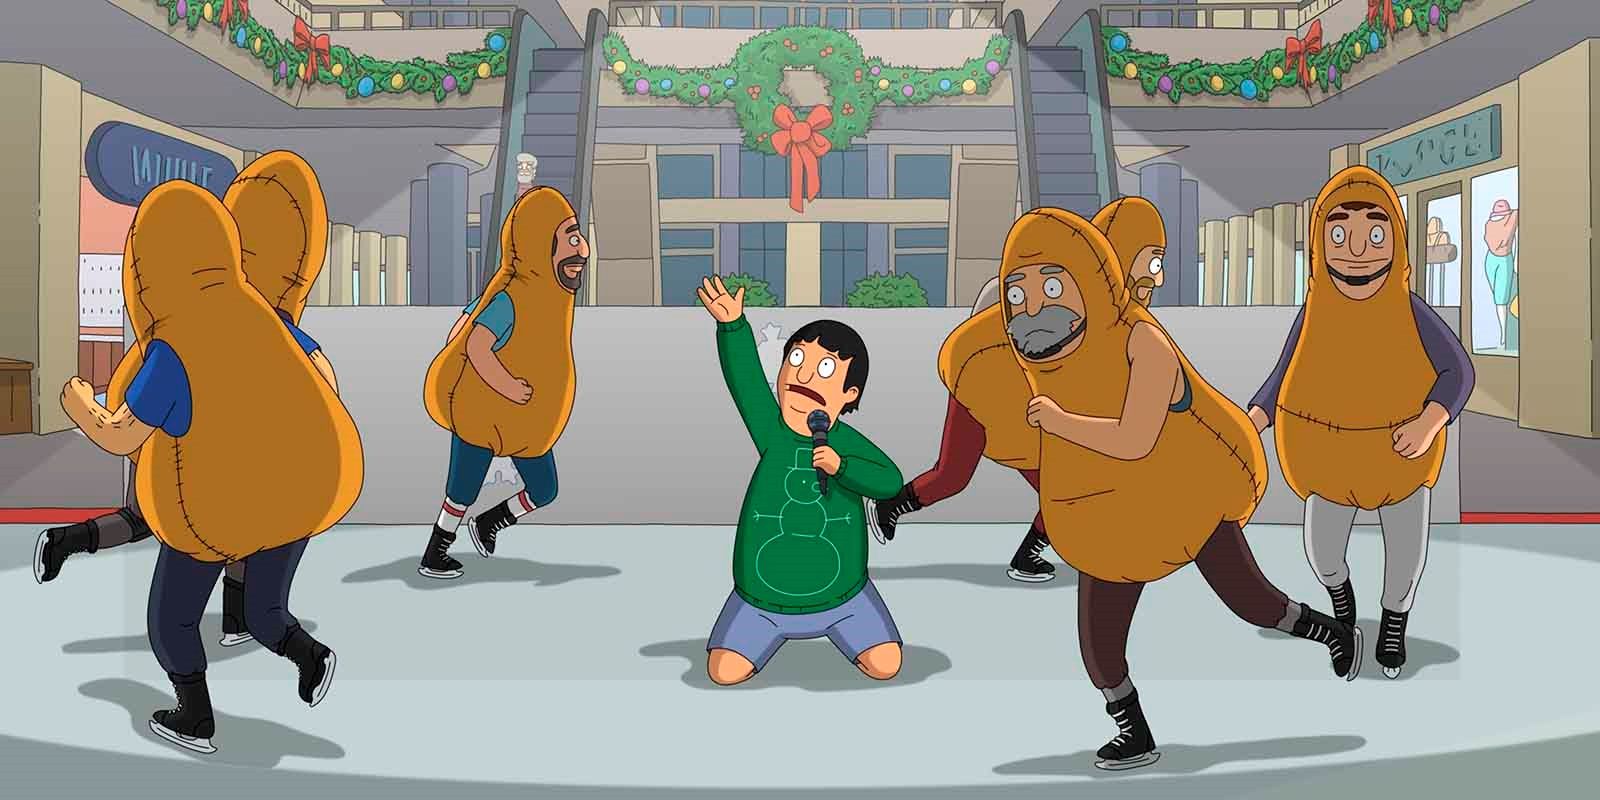 bobs burgers nice capades gene sings about tacos and chicken nuggets to mall santa